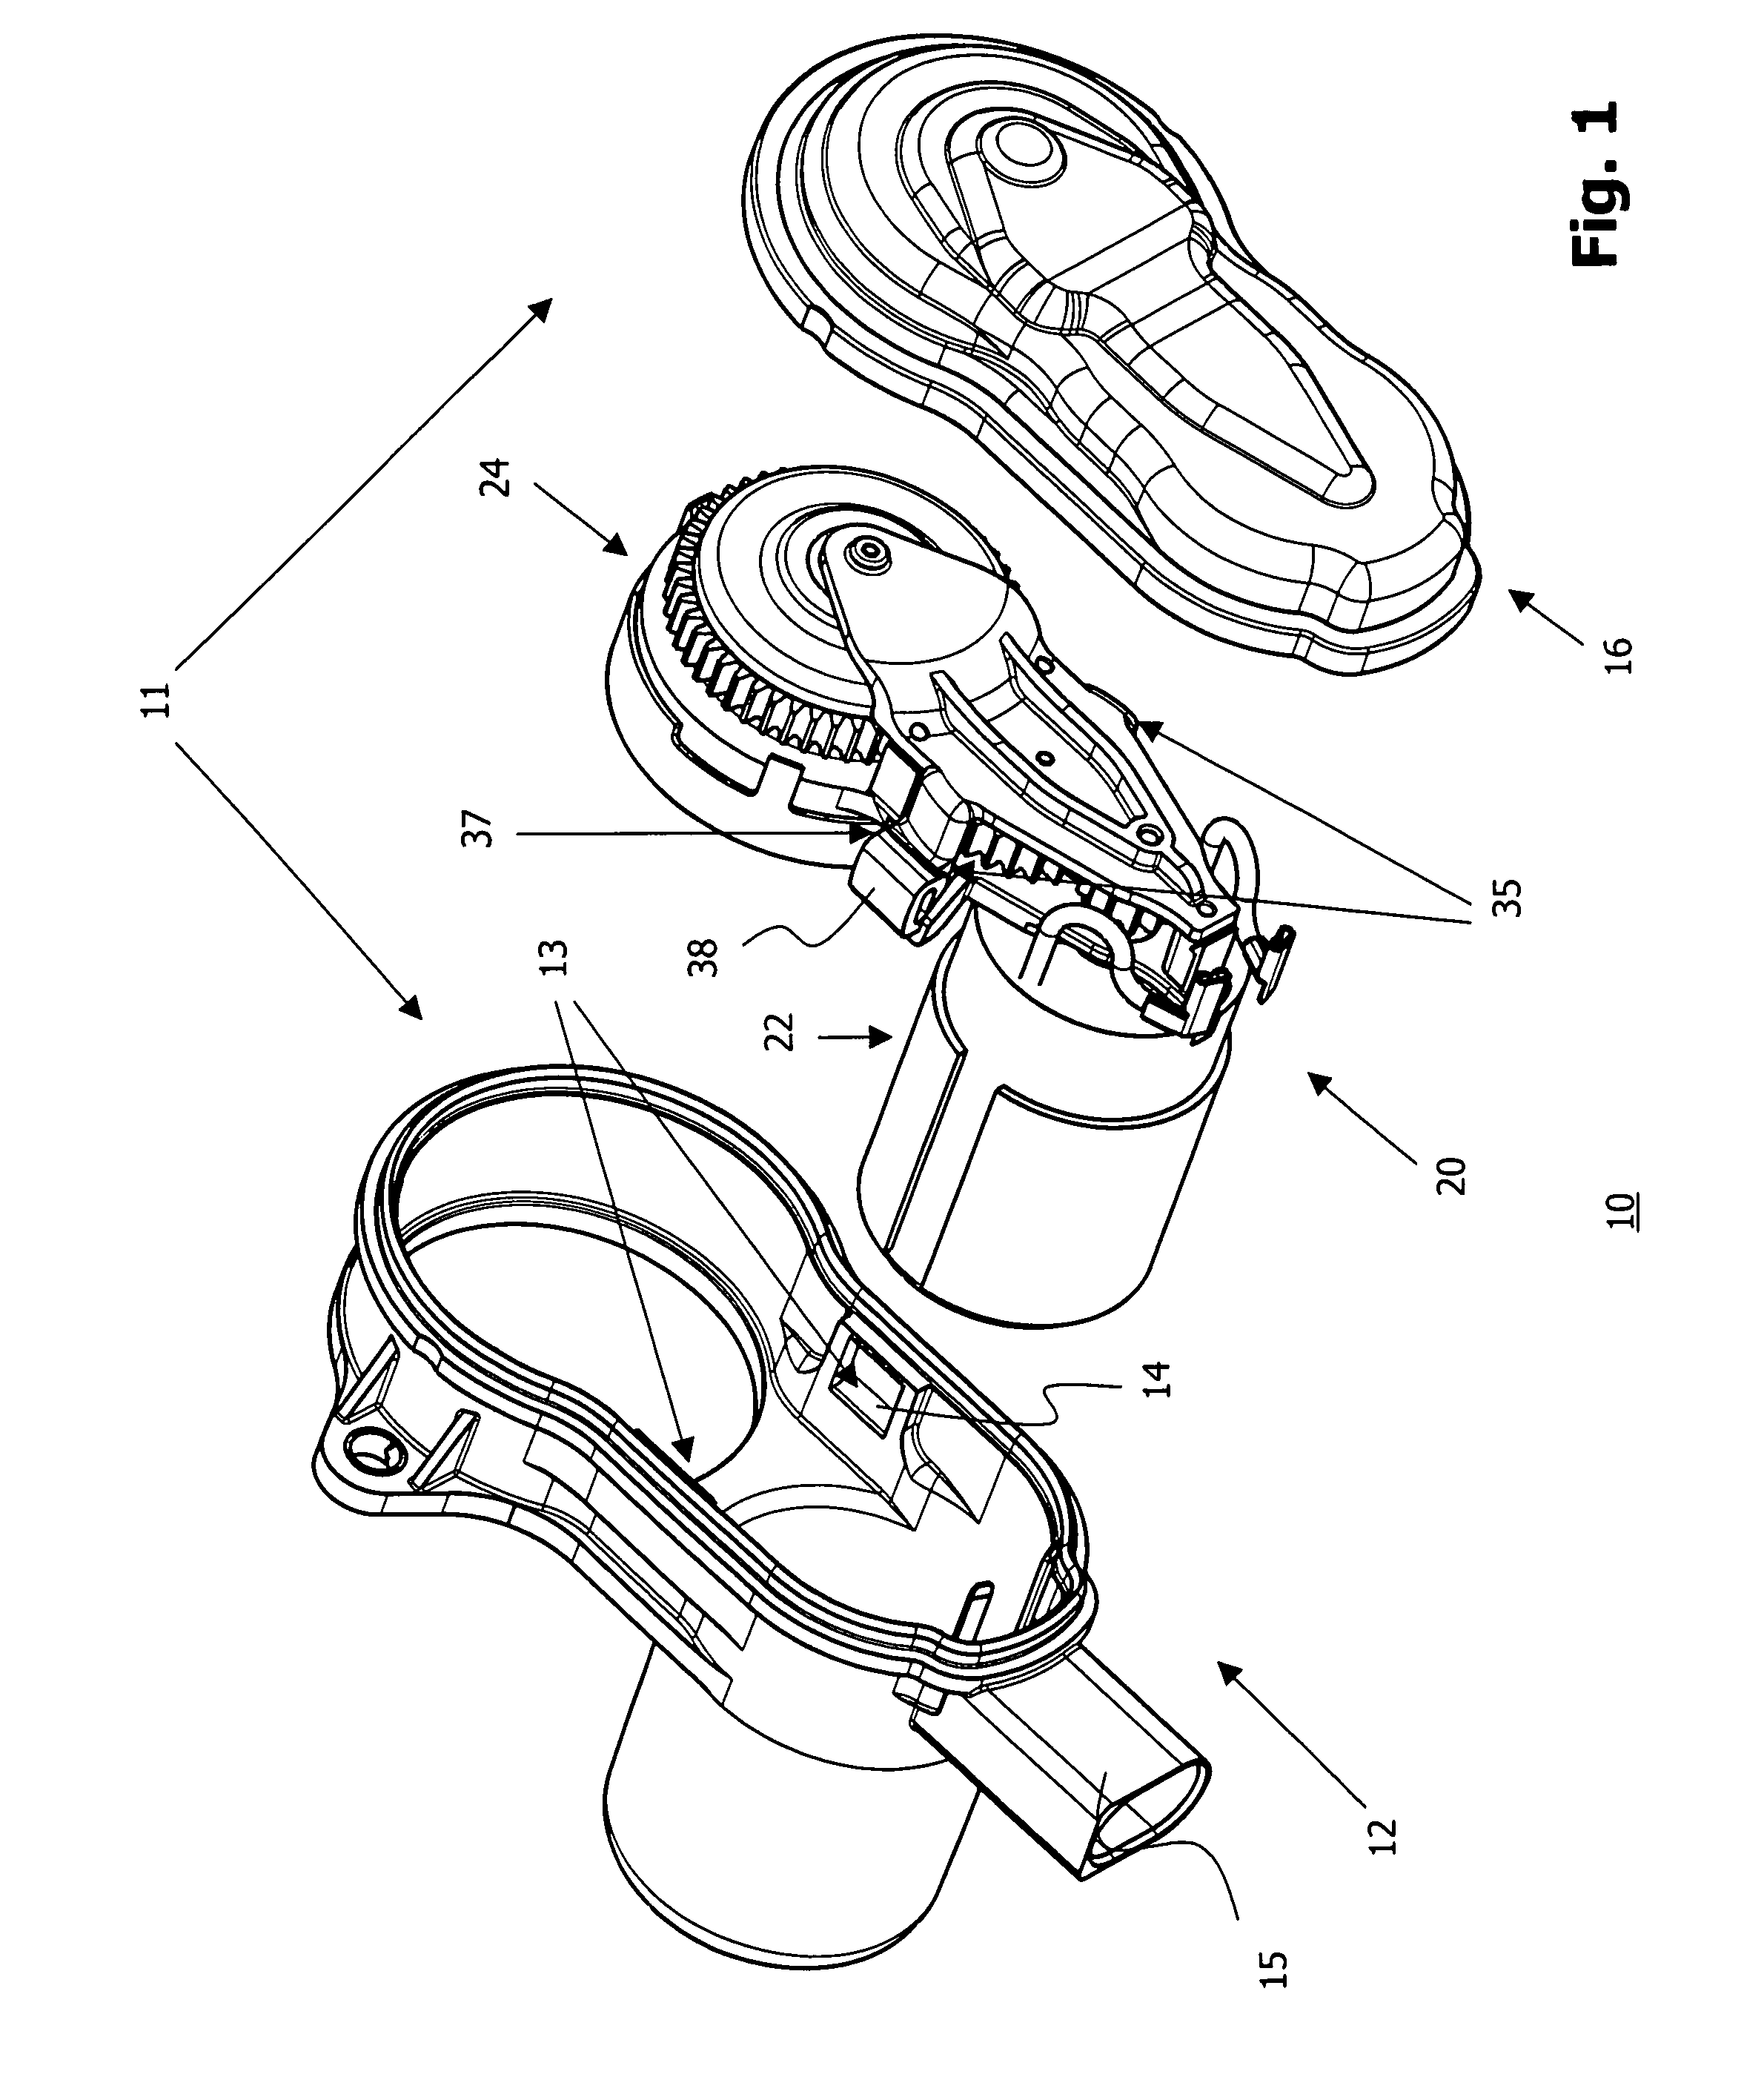 Sub-Assembly for an Electromechanical Brake Actuator